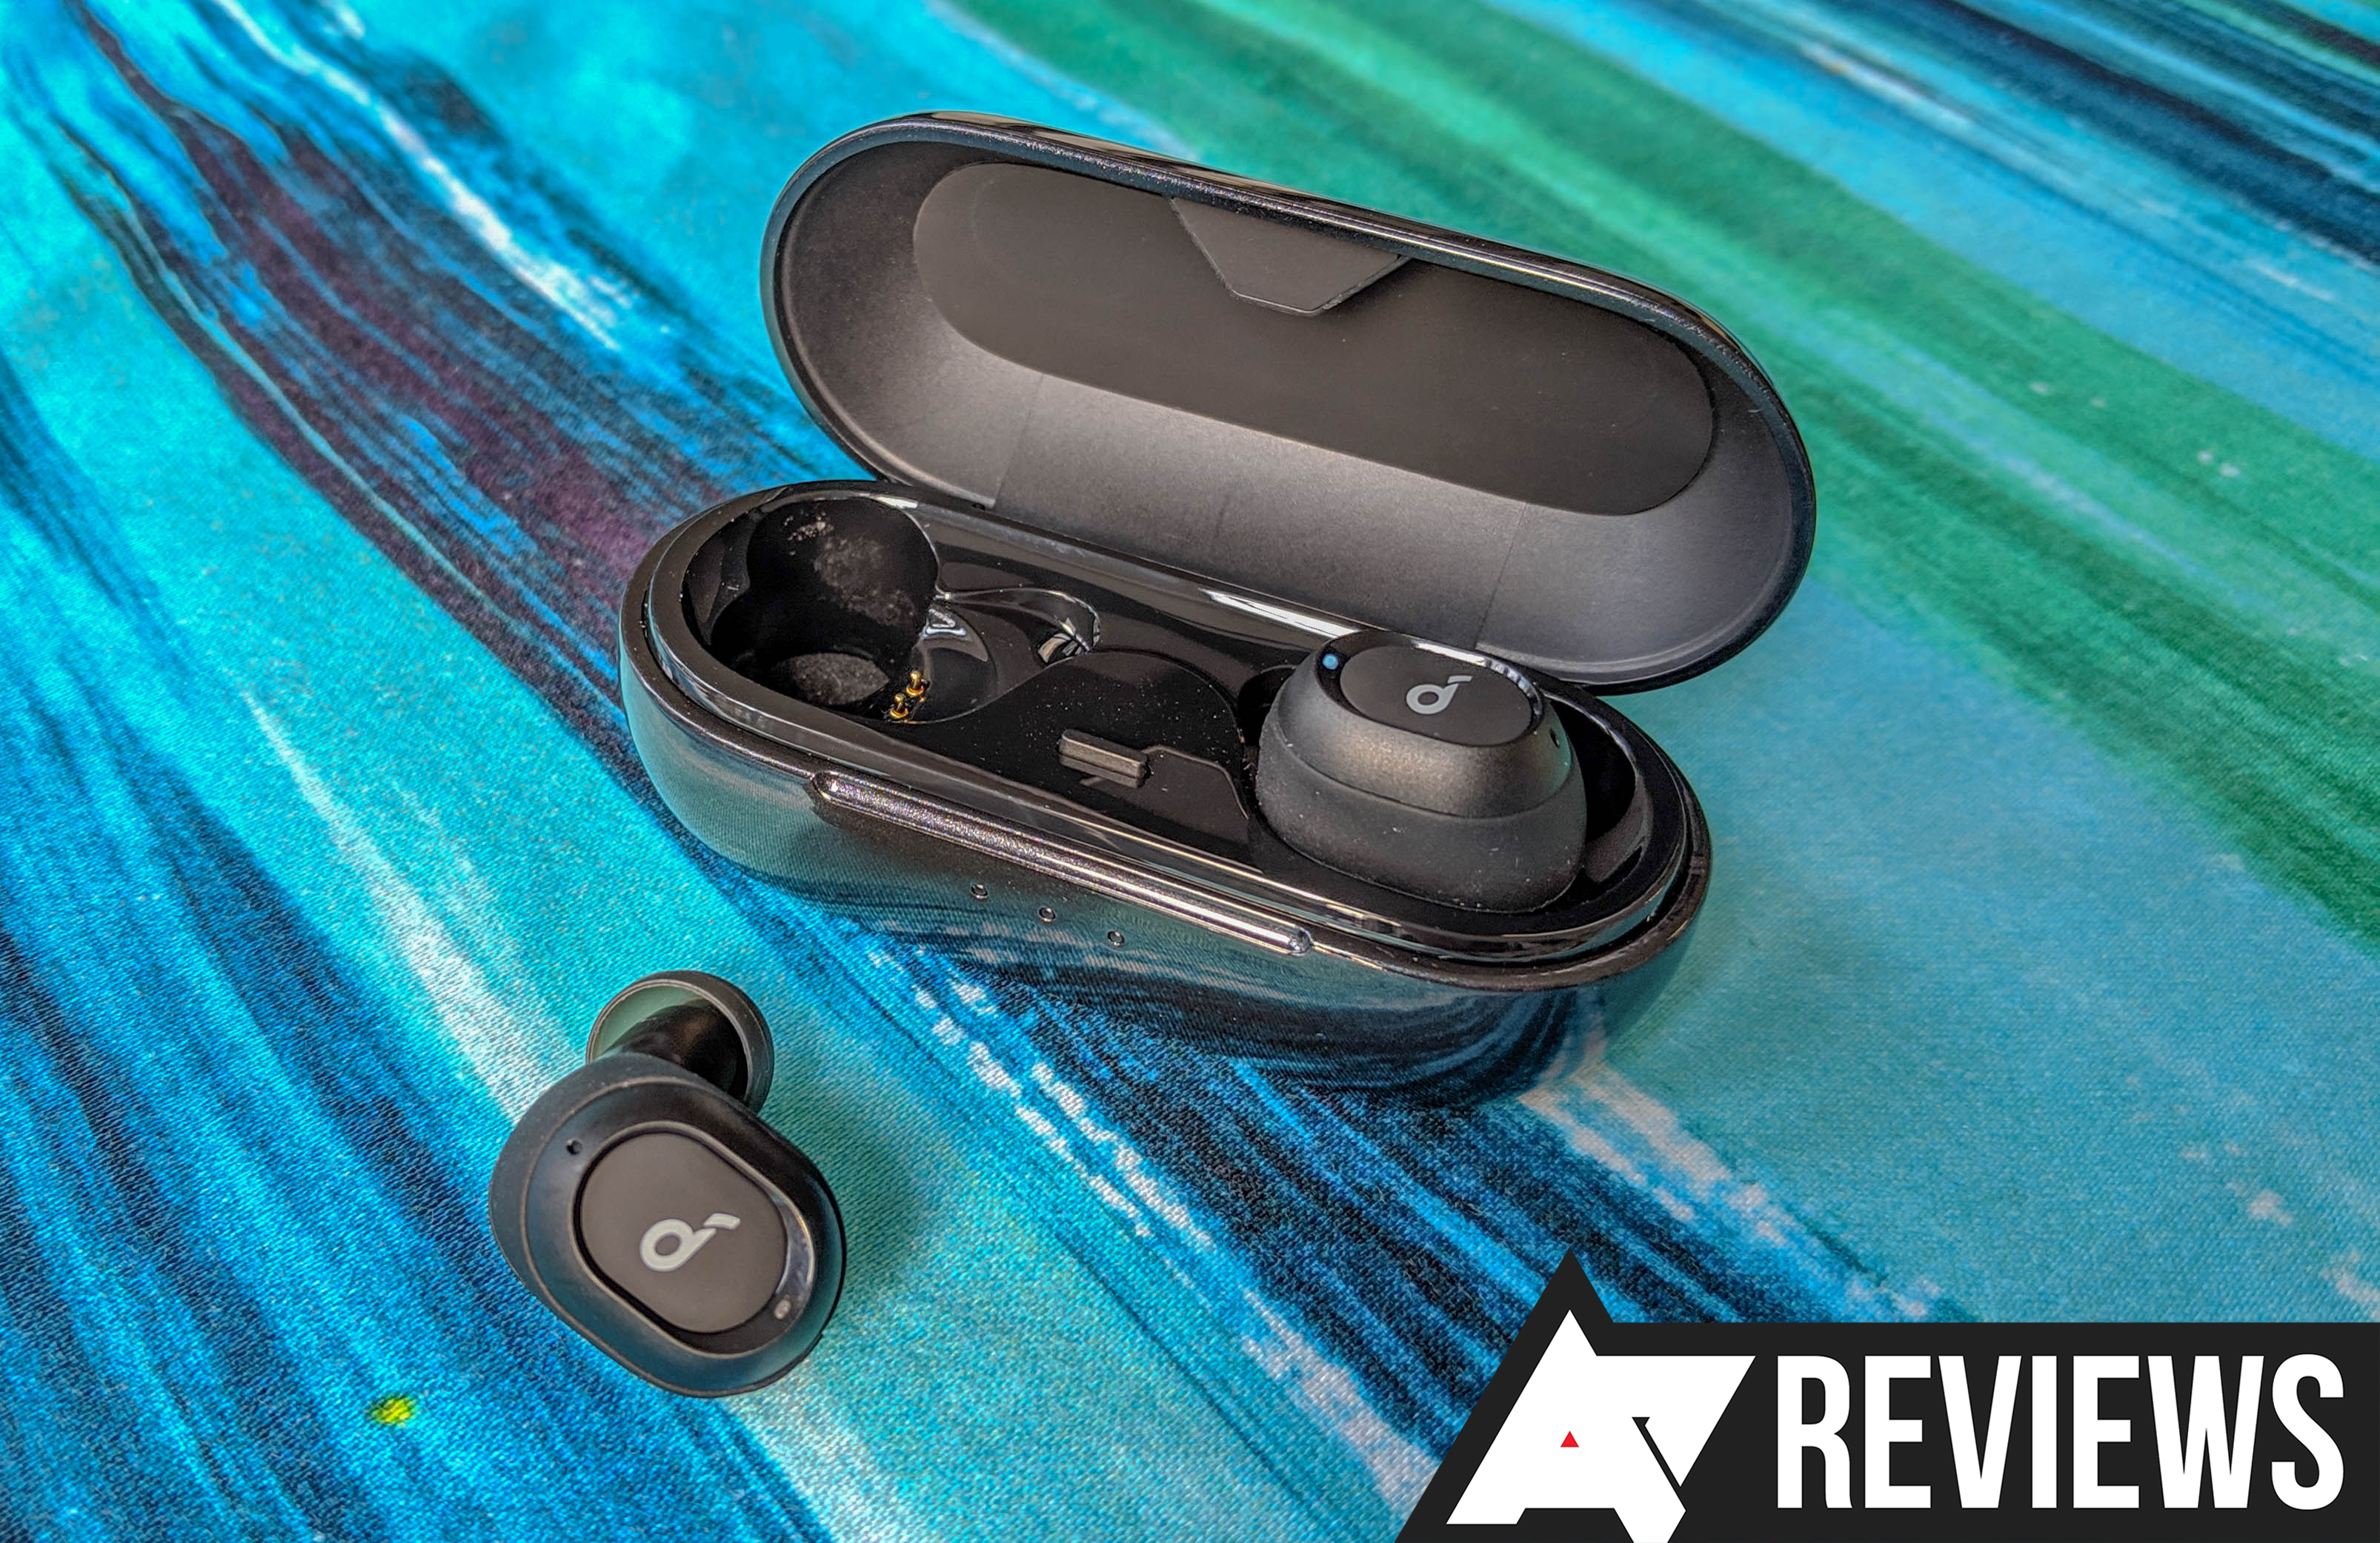 The Soundcore Neo finally bring decent audio to true wireless earbuds